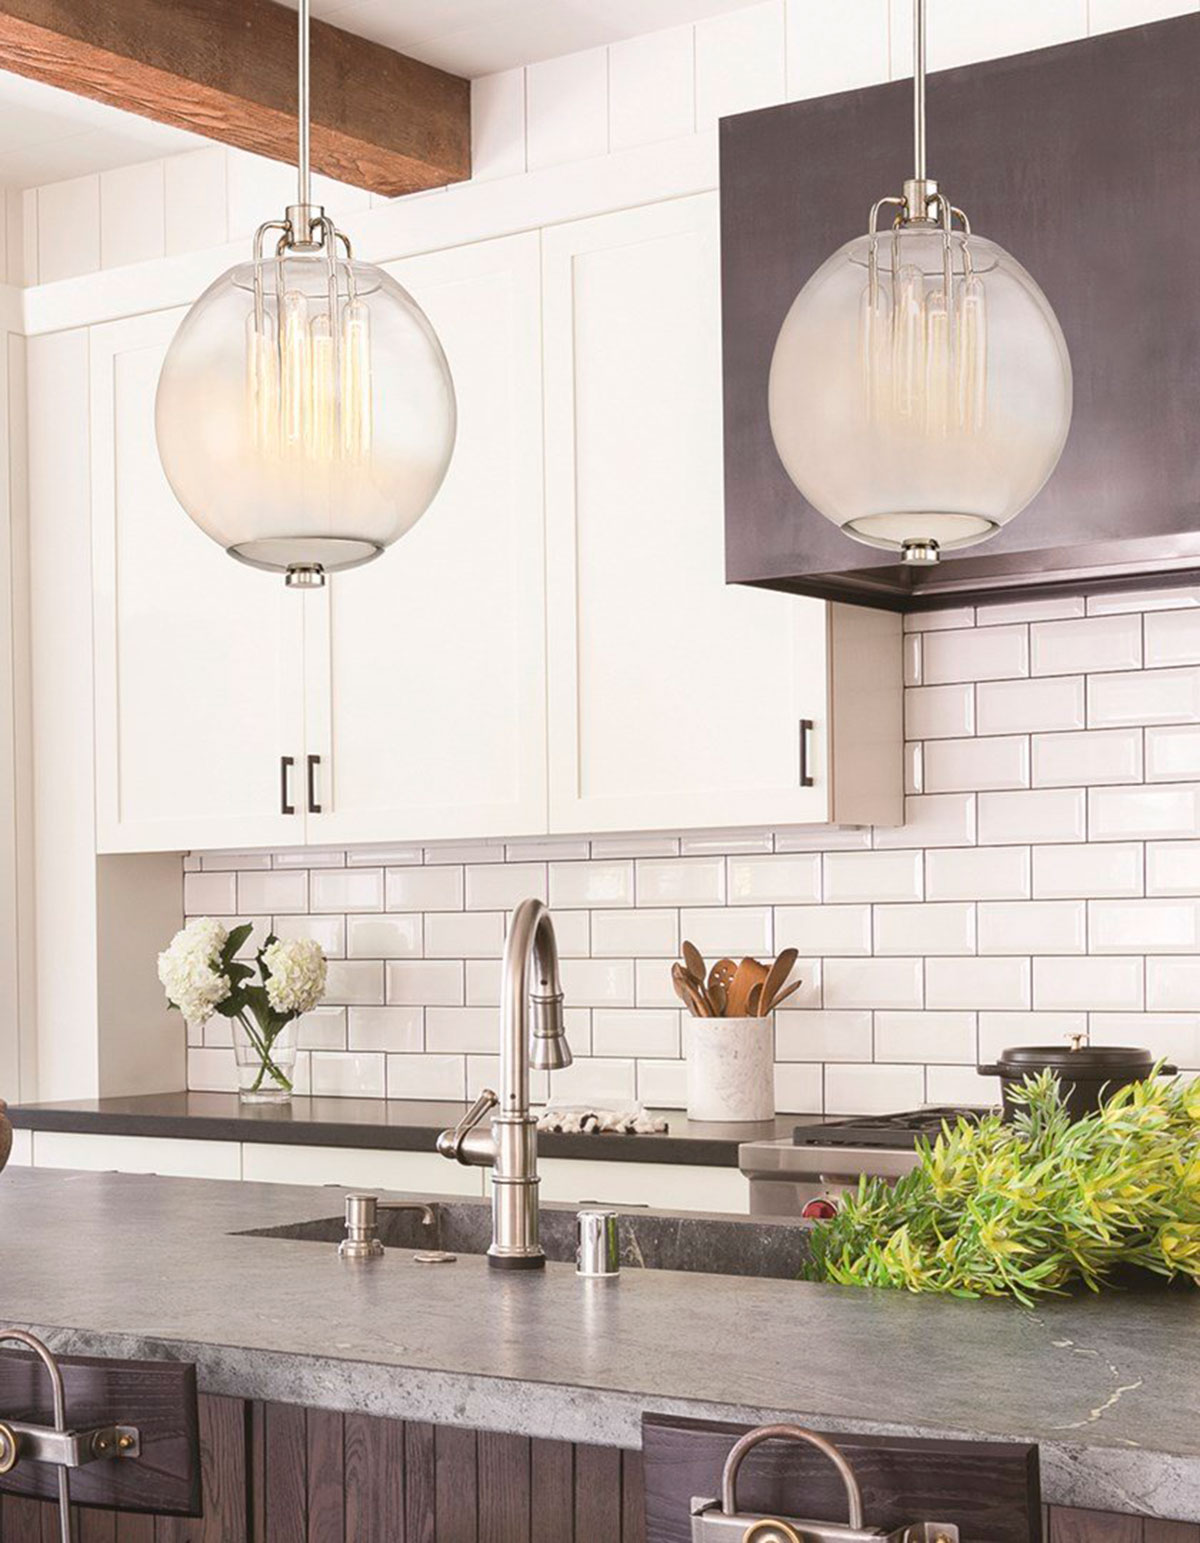 2019 Kitchen Trends That Affect Lighting